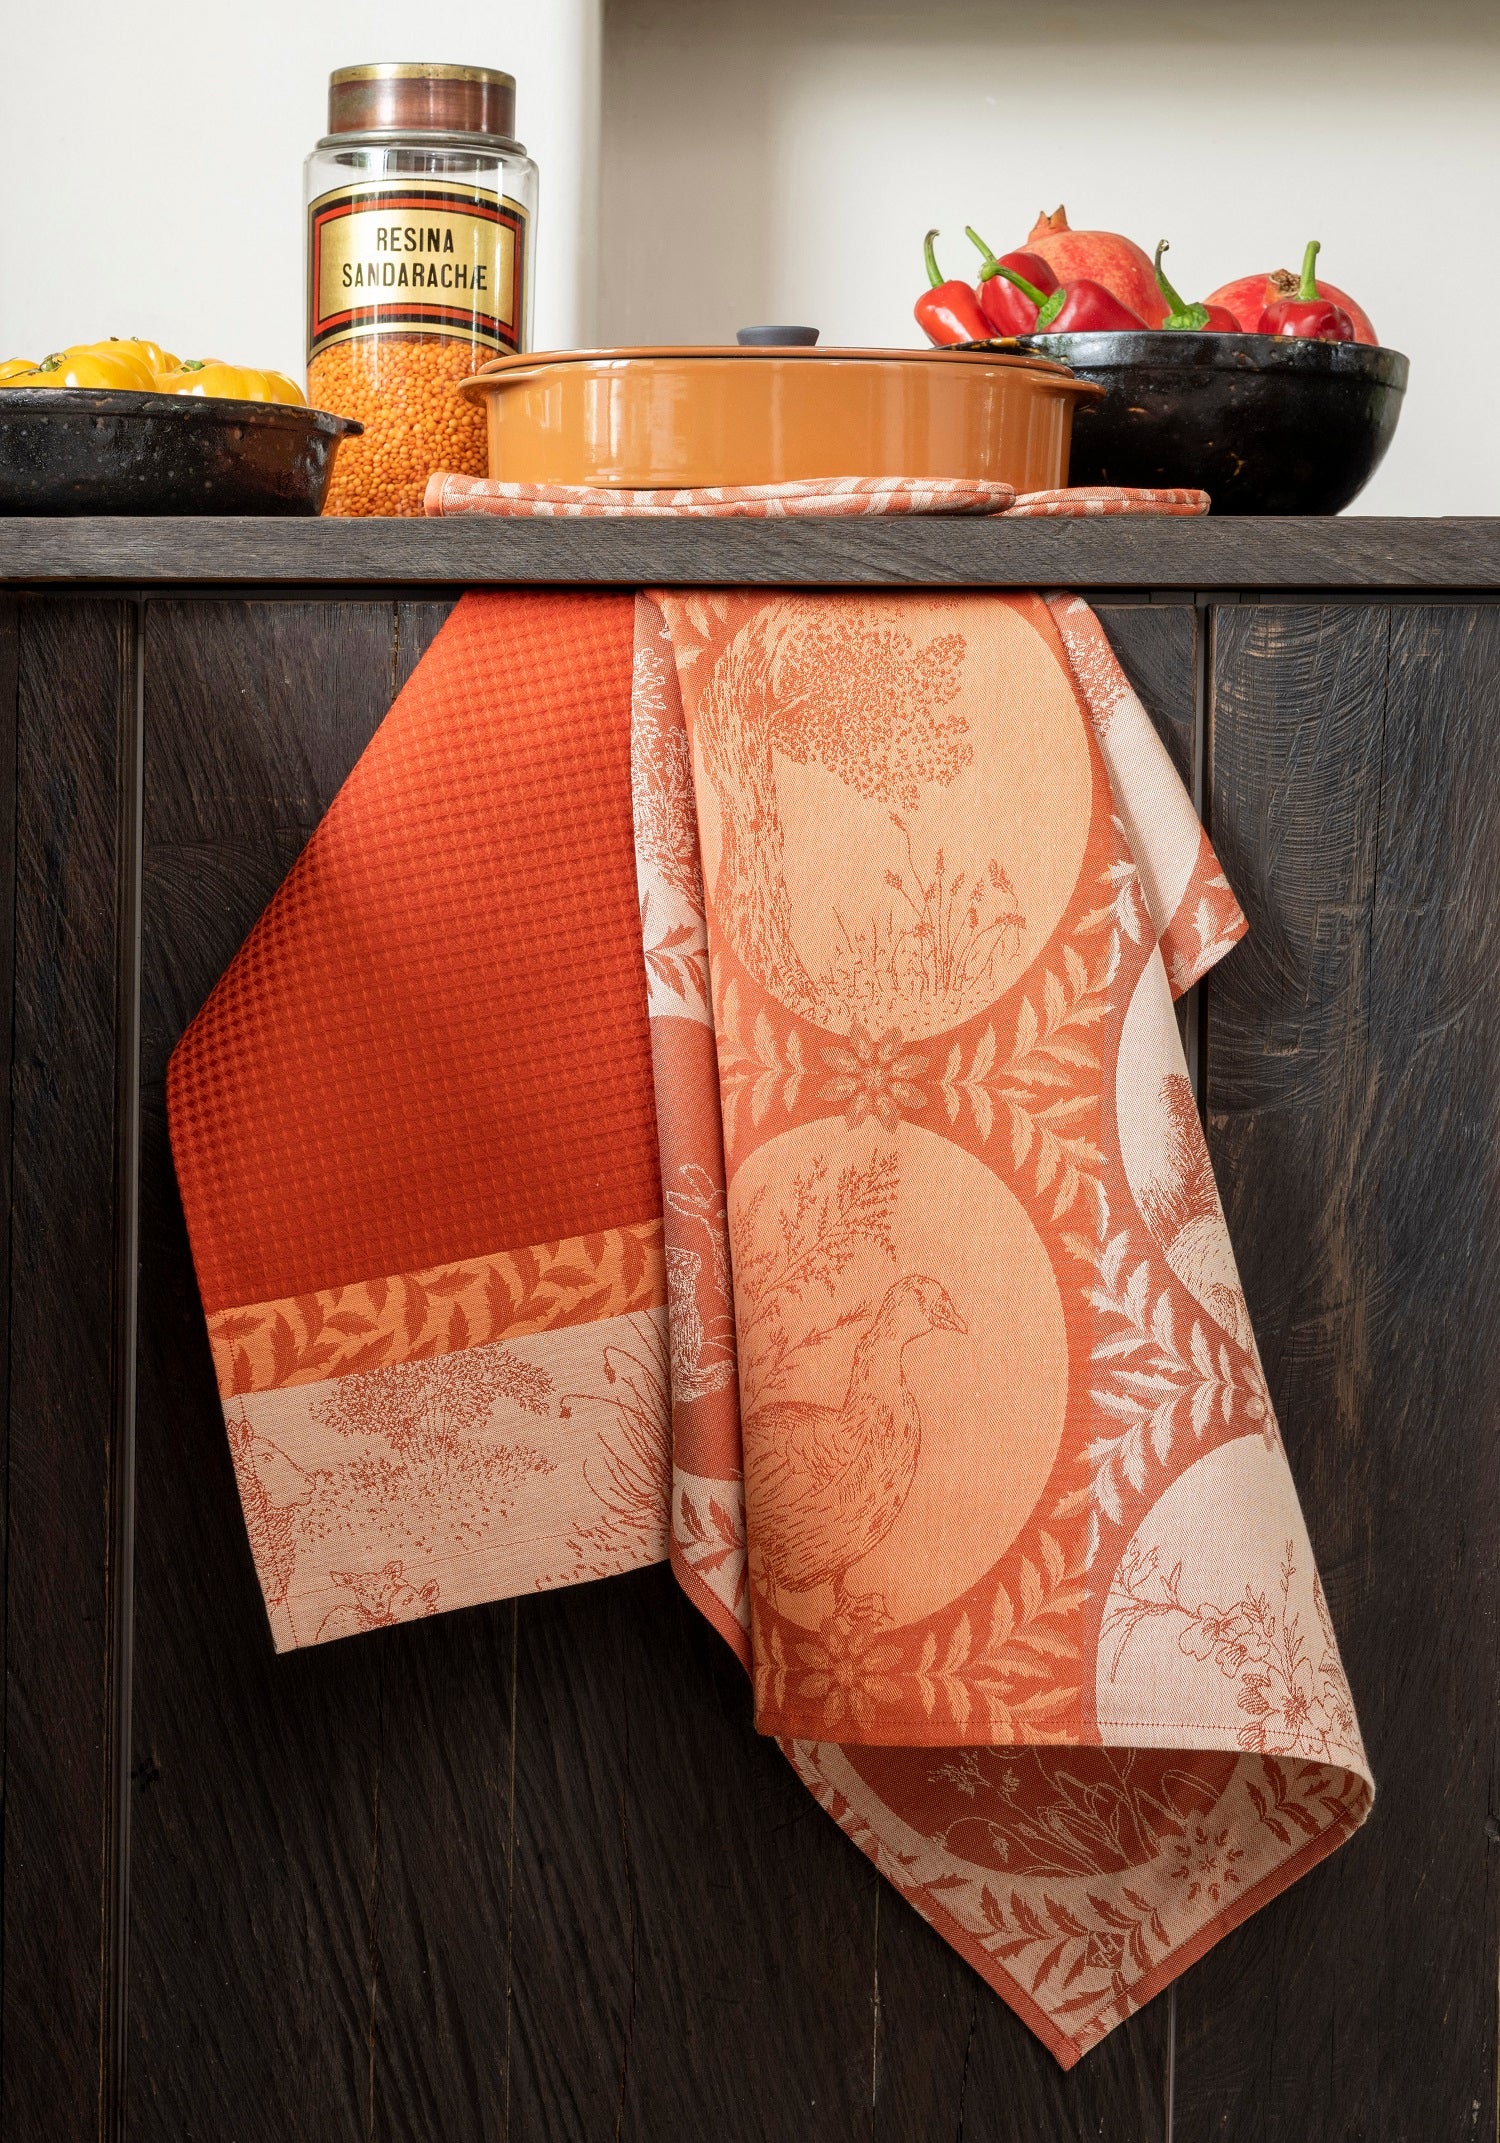 Jacquard Francais "Josephine" (Red), Woven cotton hand towel. Made in France.